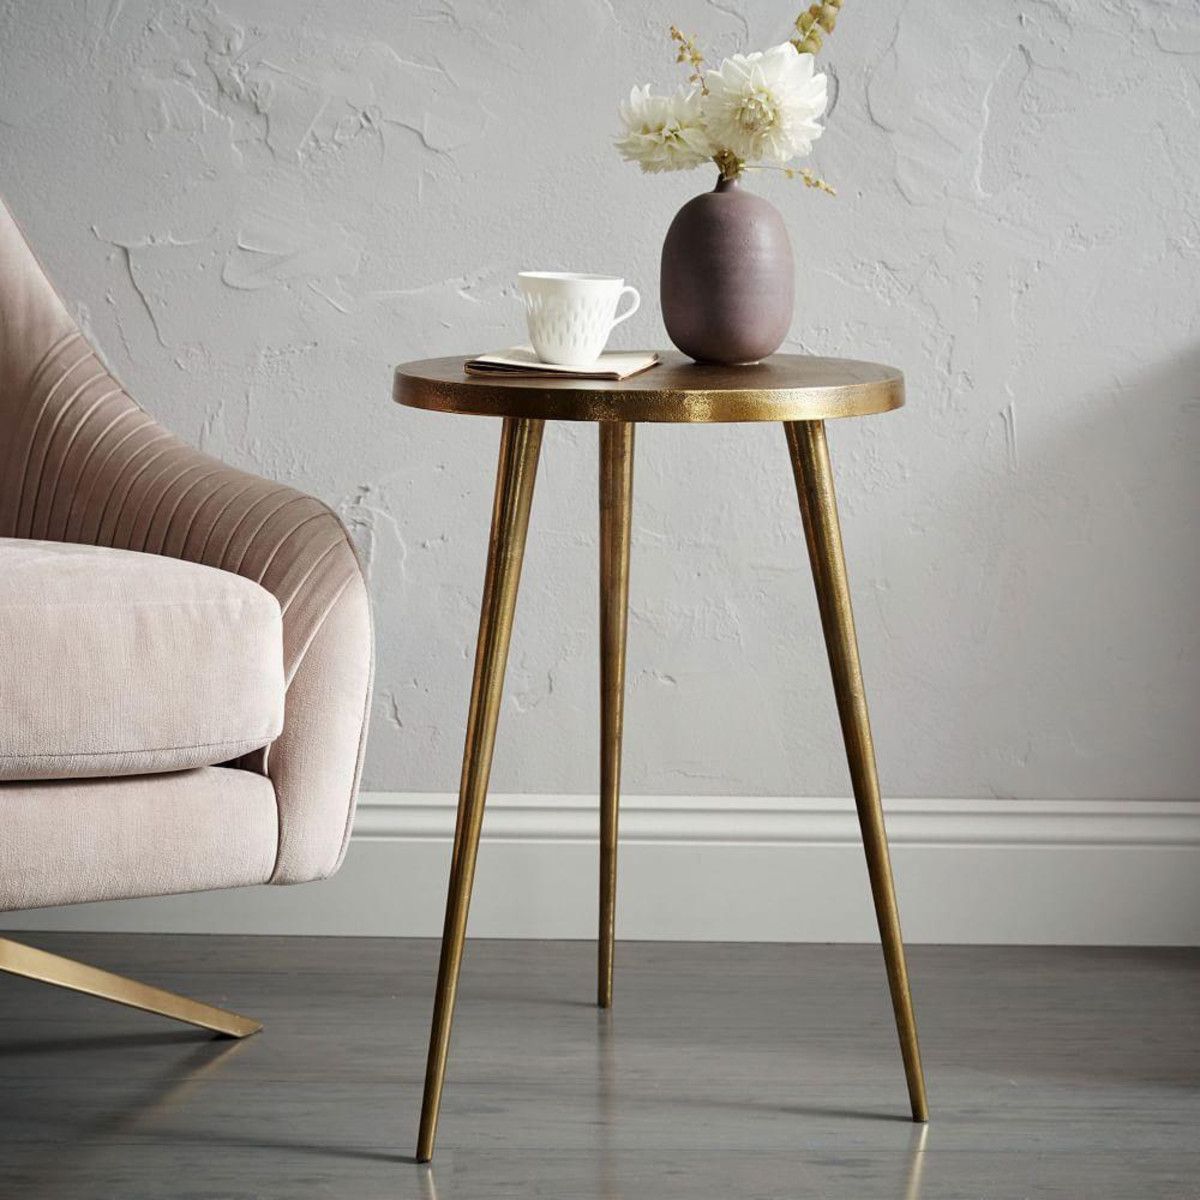 tripod side table living rooms and nook ideas accent west elm diy rustic coffee ikea white storage unit with small nesting tables fine furniture edmonton dale tiffany hummingbird